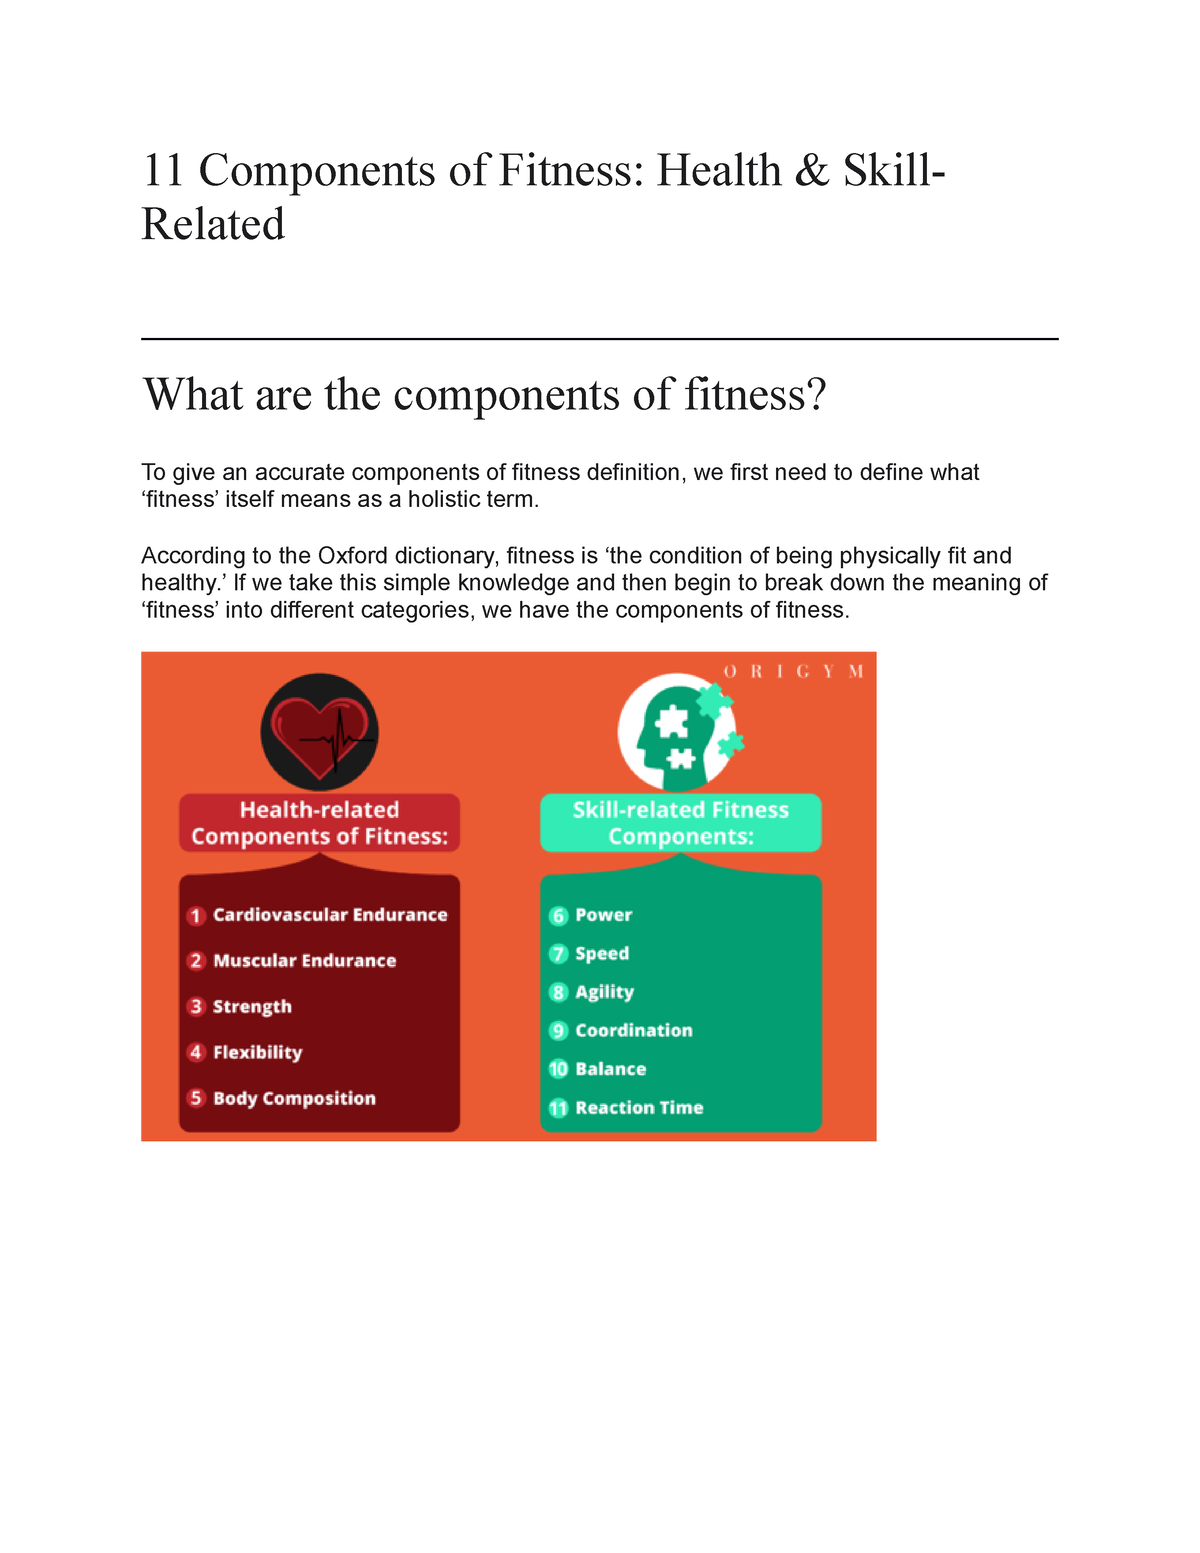 lesson-3-n-a-11-components-of-fitness-health-skill-related